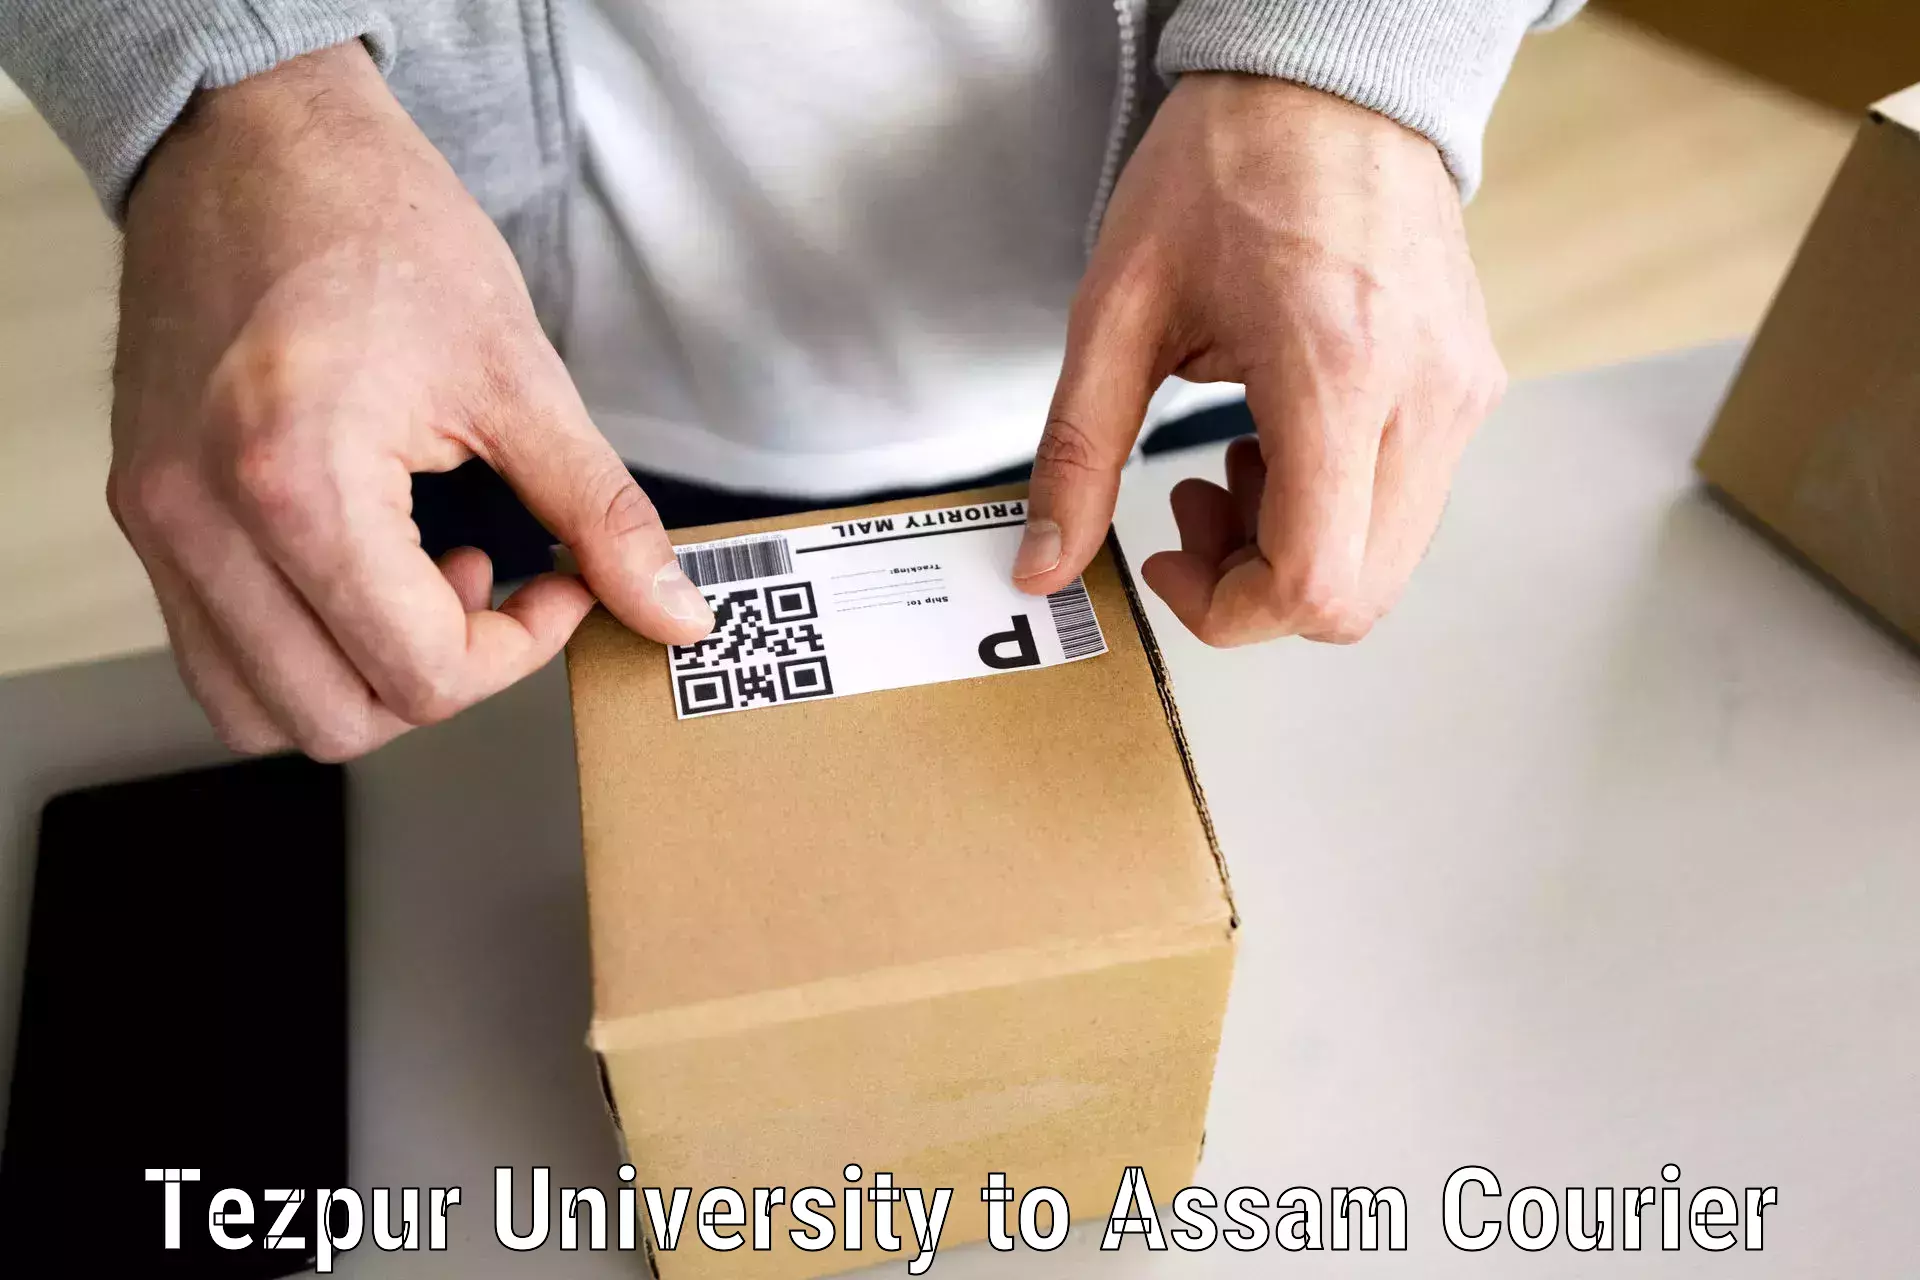 Reliable moving assistance Tezpur University to Dibrugarh University